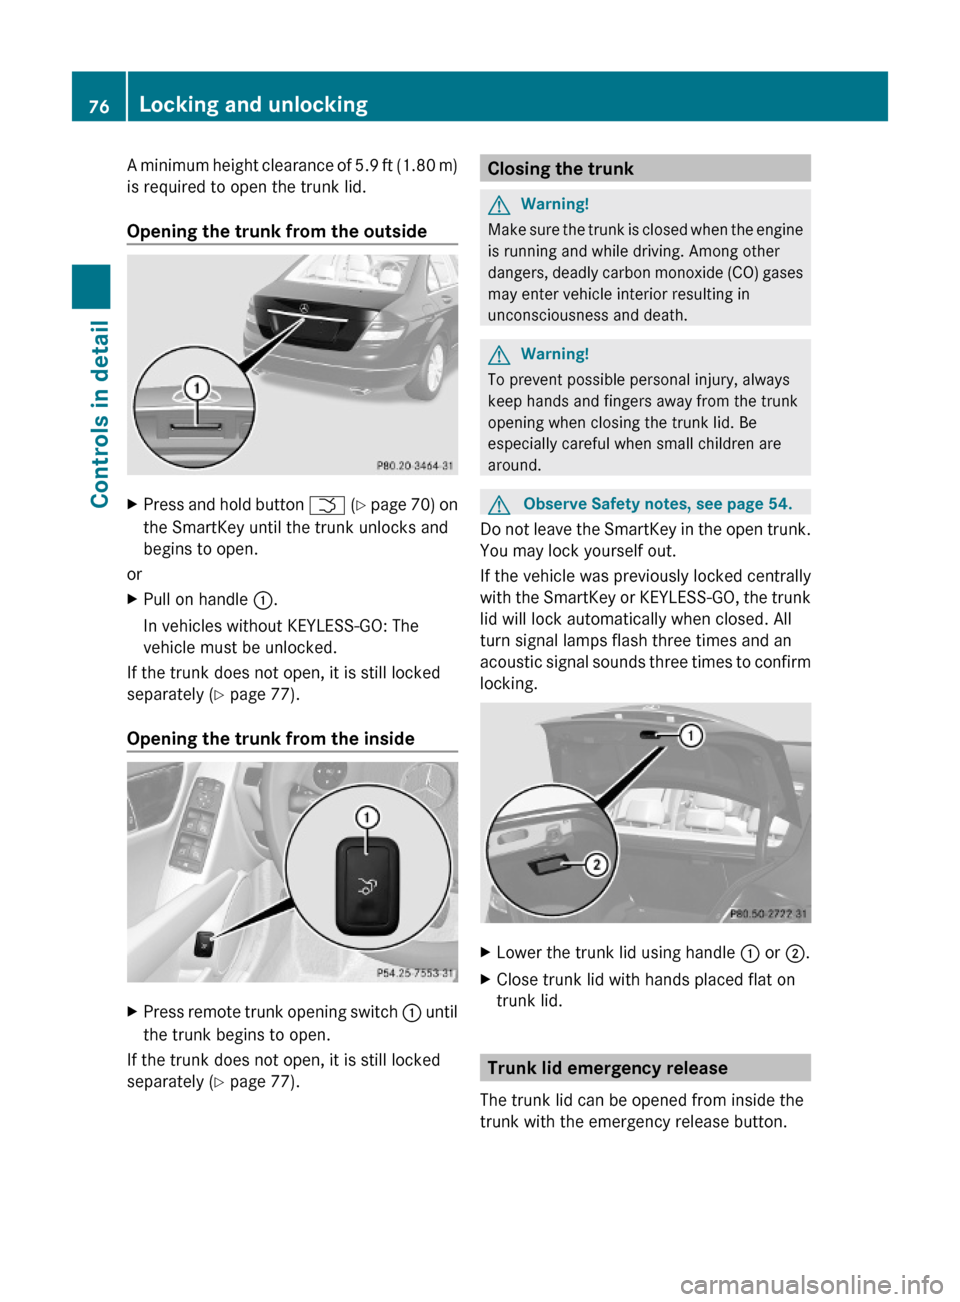 MERCEDES-BENZ C300 4MATIC 2010 W204 Owners Manual A minimum height clearance of 5.9 ft (1.80 m)
is required to open the trunk lid.
Opening the trunk from the outside
XPress and hold button F (Y page 70) on
the SmartKey until the trunk unlocks and
beg